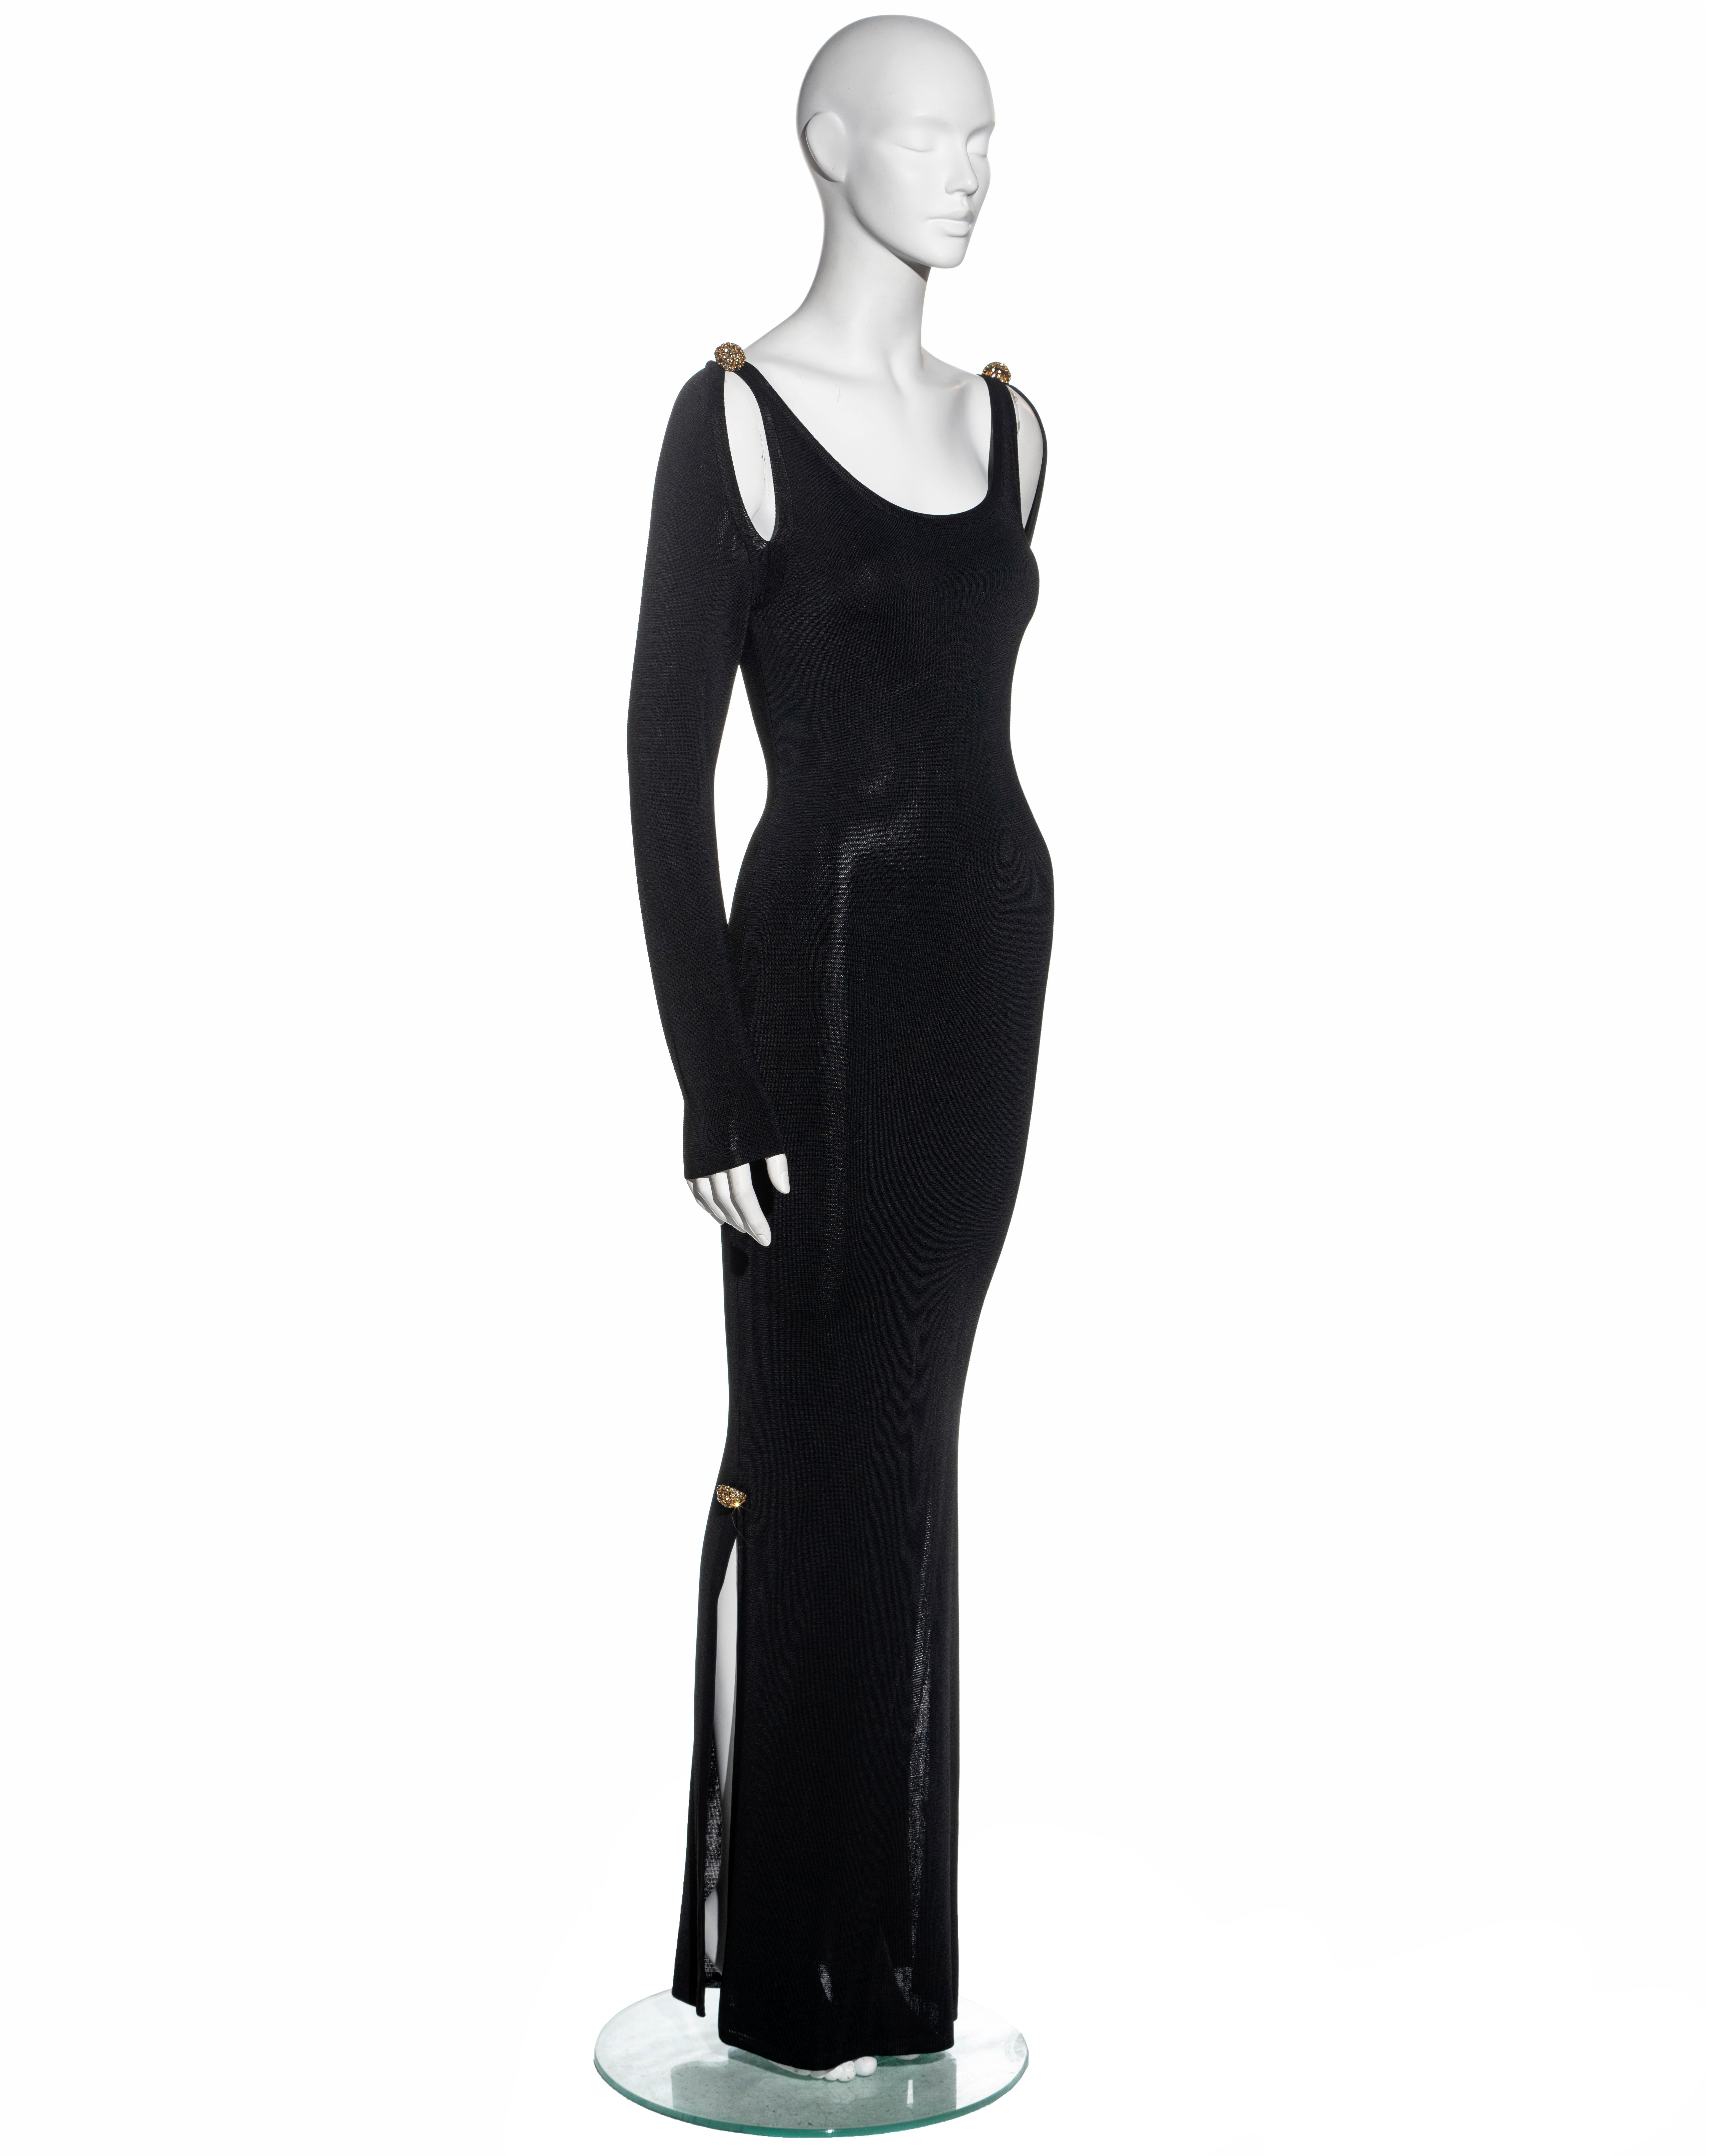 Women's Christian Lacroix black evening dress with crystal ornaments, fw 1992